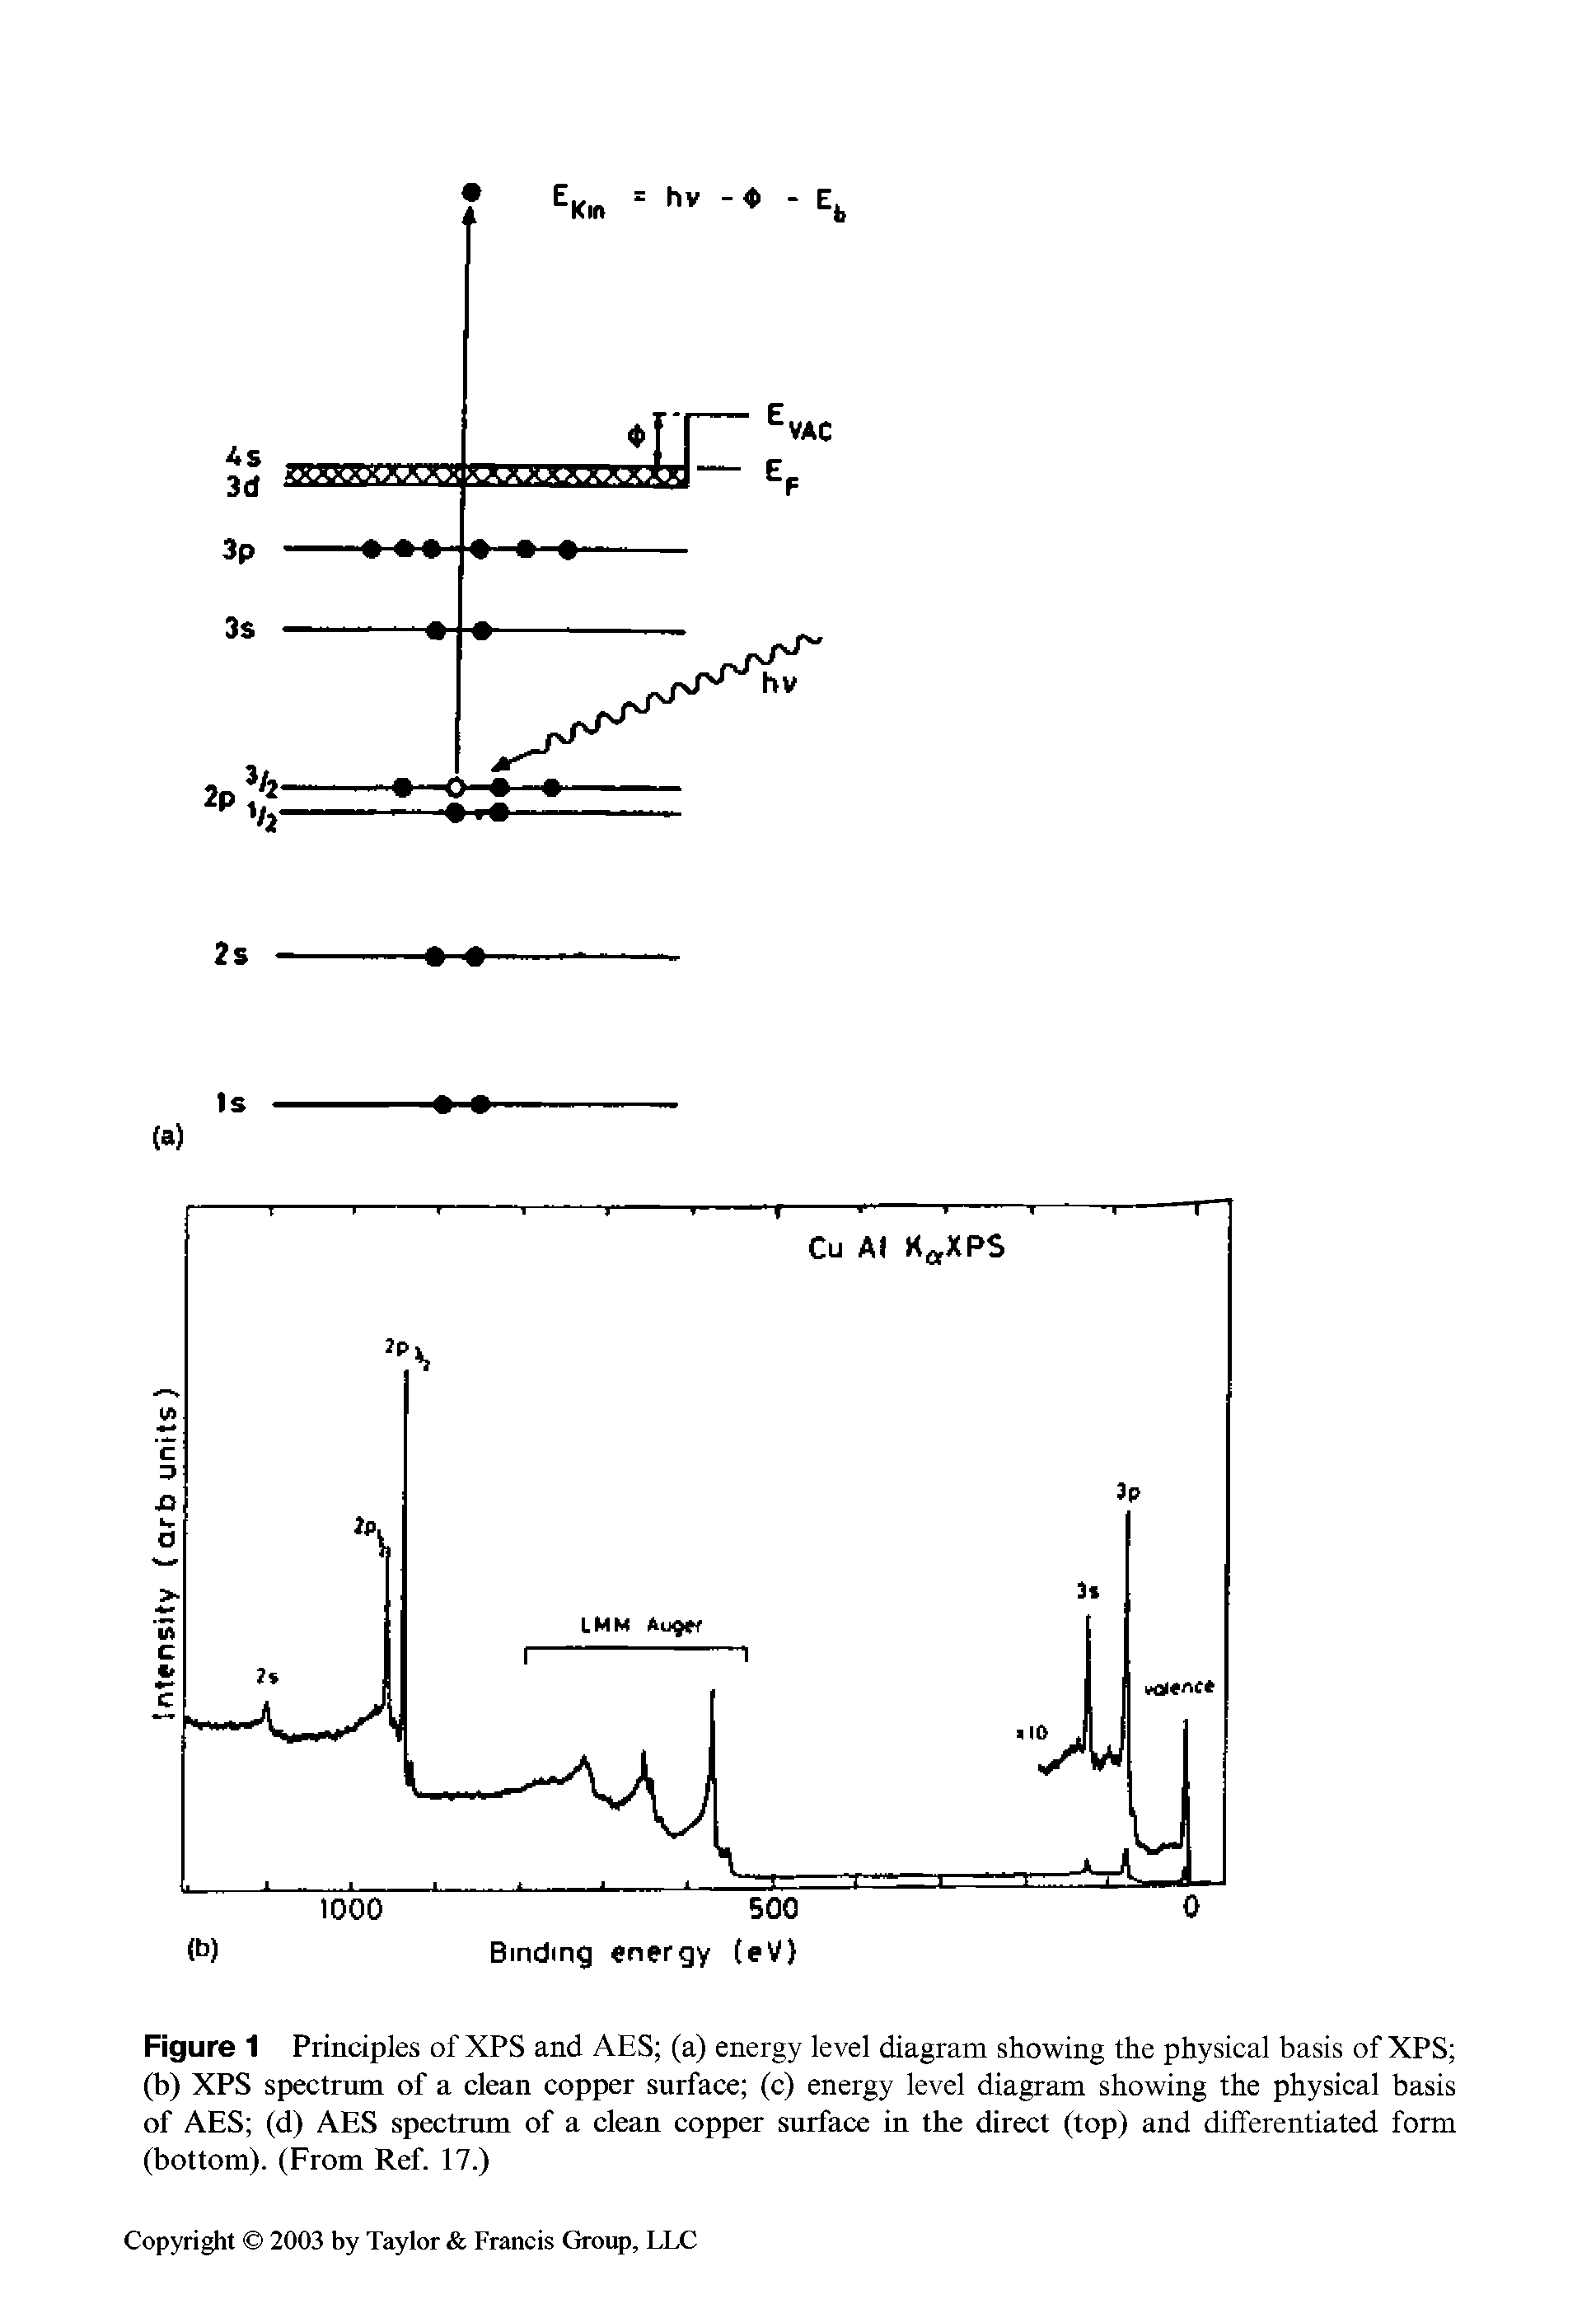 Figure 1 Principles of XPS and AES (a) energy level diagram showing the physical basis of XPS (b) XPS spectrum of a clean copper surface (c) energy level diagram showing the physical basis of AES (d) AES spectrum of a clean copper surface in the direct (top) and dilferentiated form (bottom). (From Ref. 17.)...